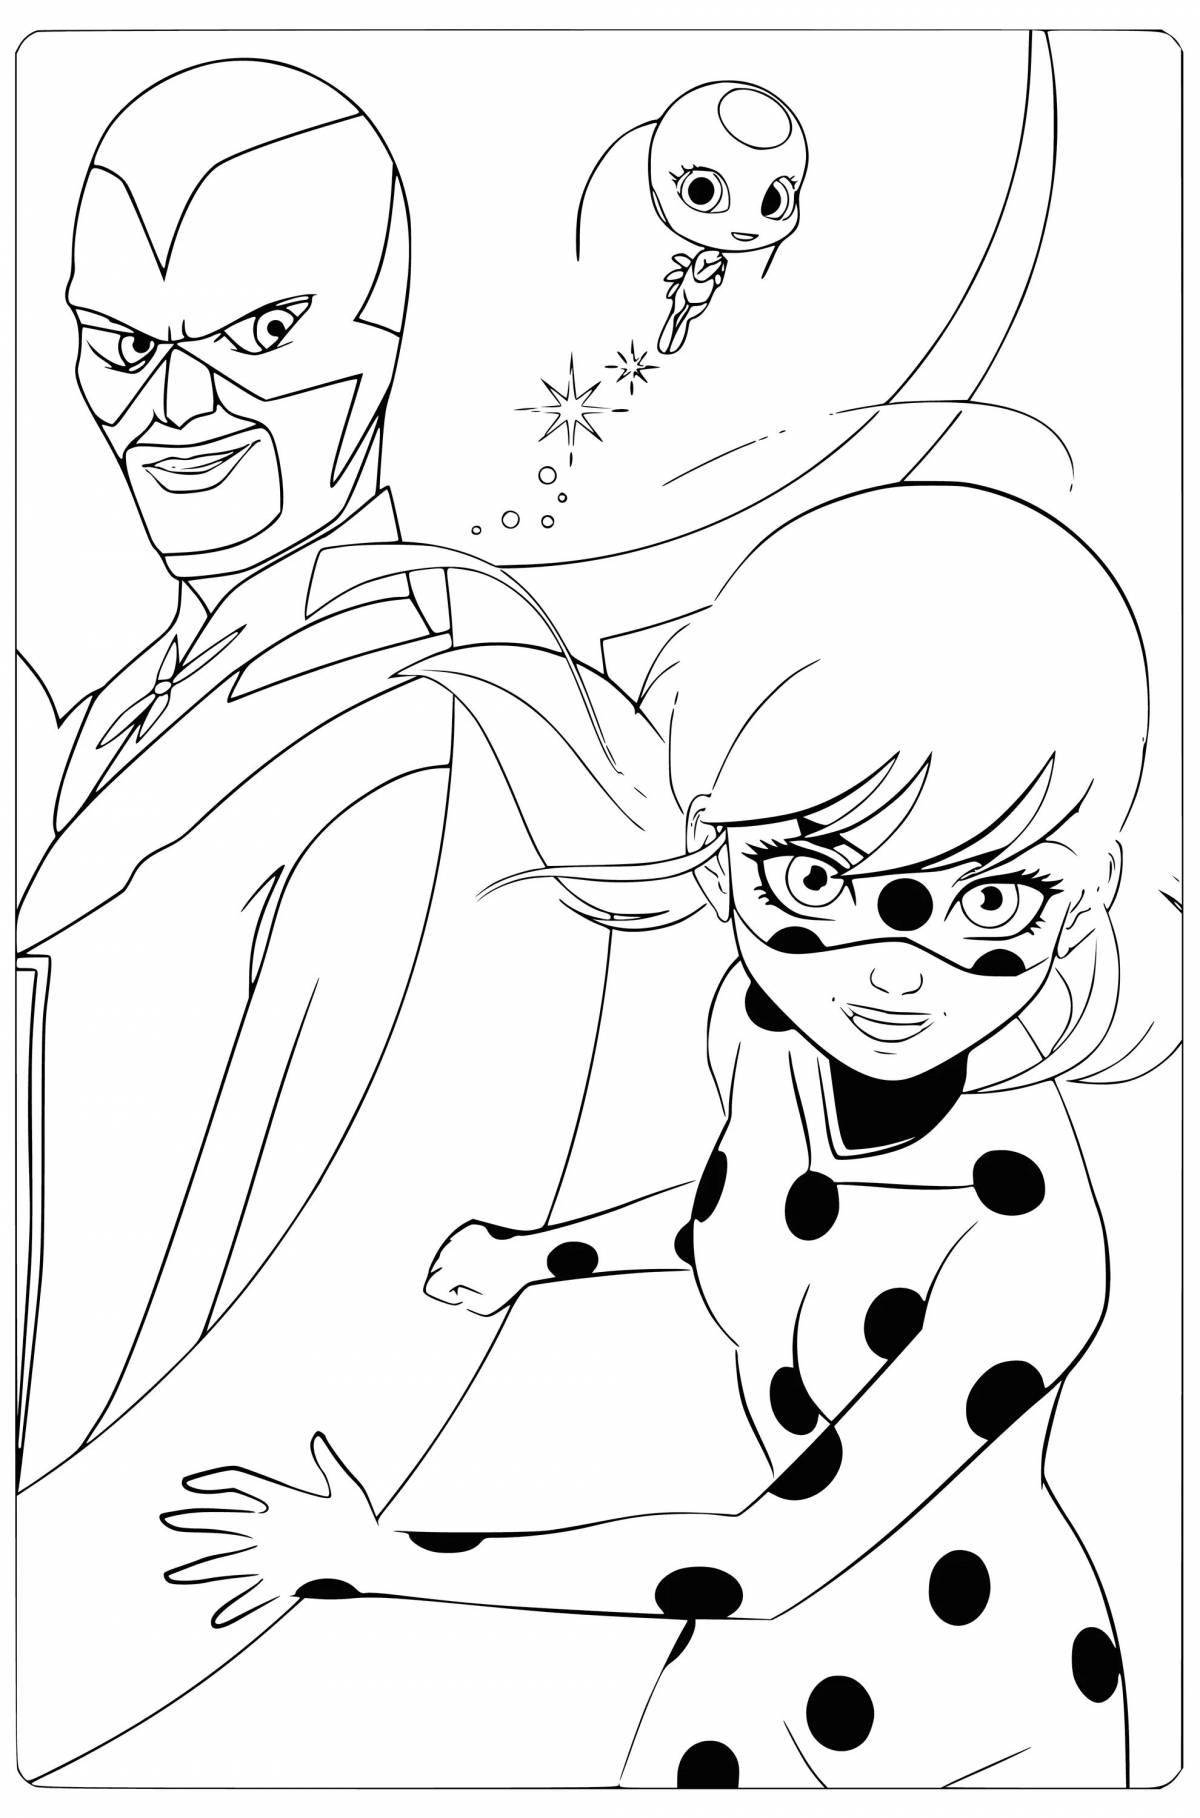 Fashion ladybug and super cat coloring book